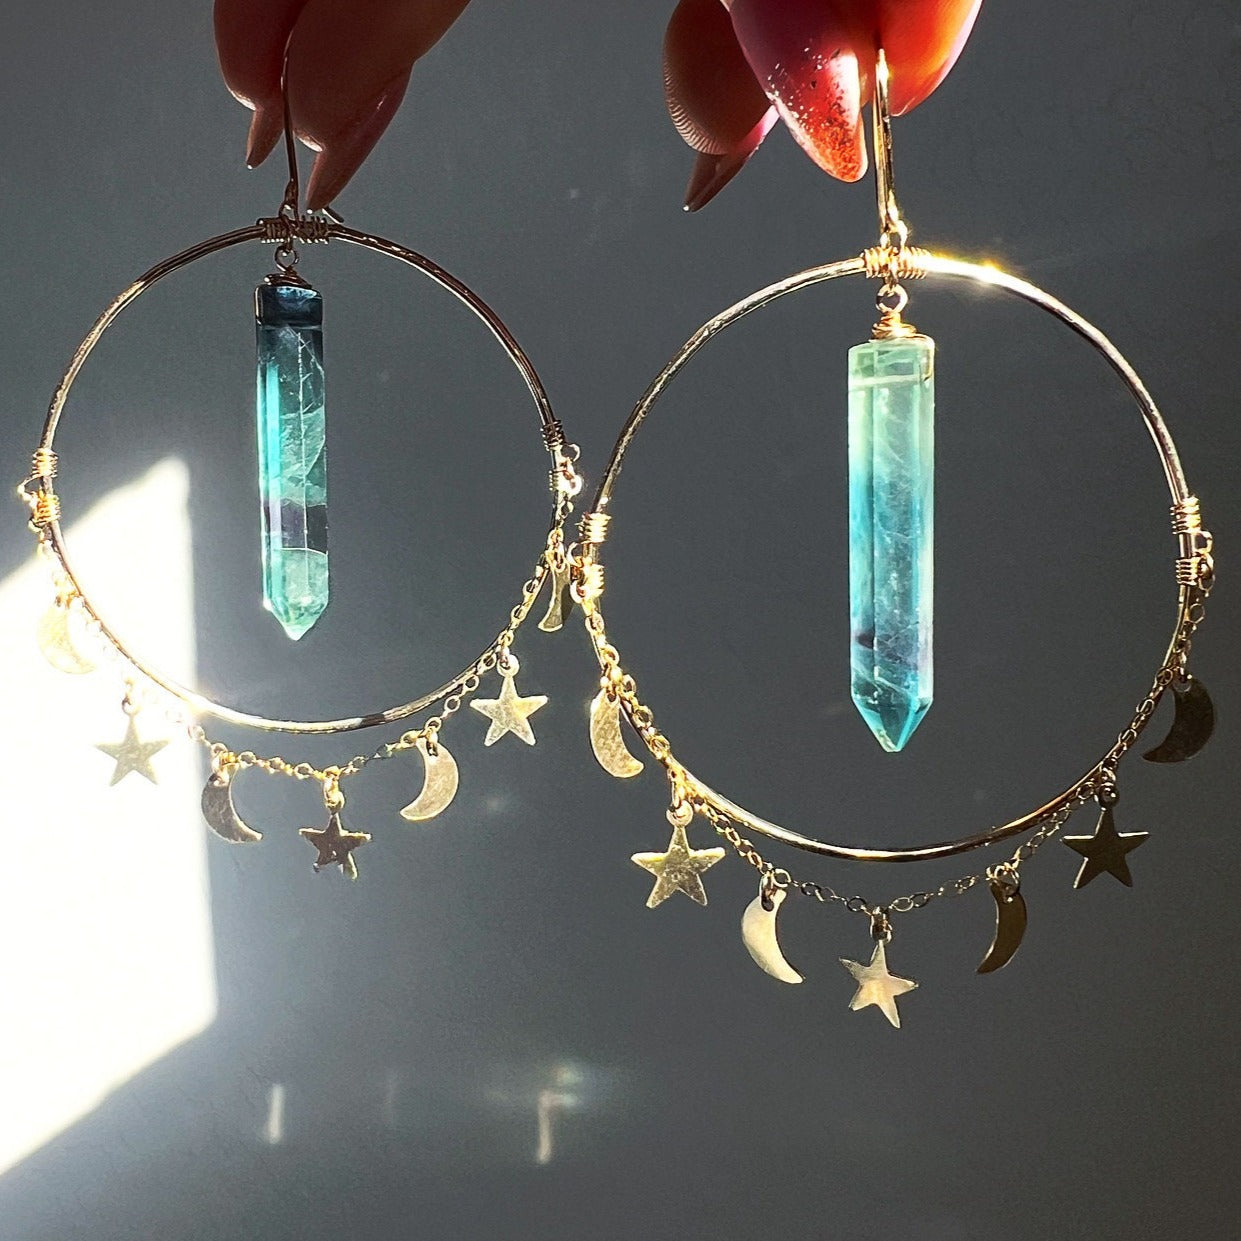 Moon and Star Crystal Hoop Earrings, Celestial Statement Earrings, Gypsy Hoop Earrings, Gold Moon Jewelry, Moon and Star Jewelry